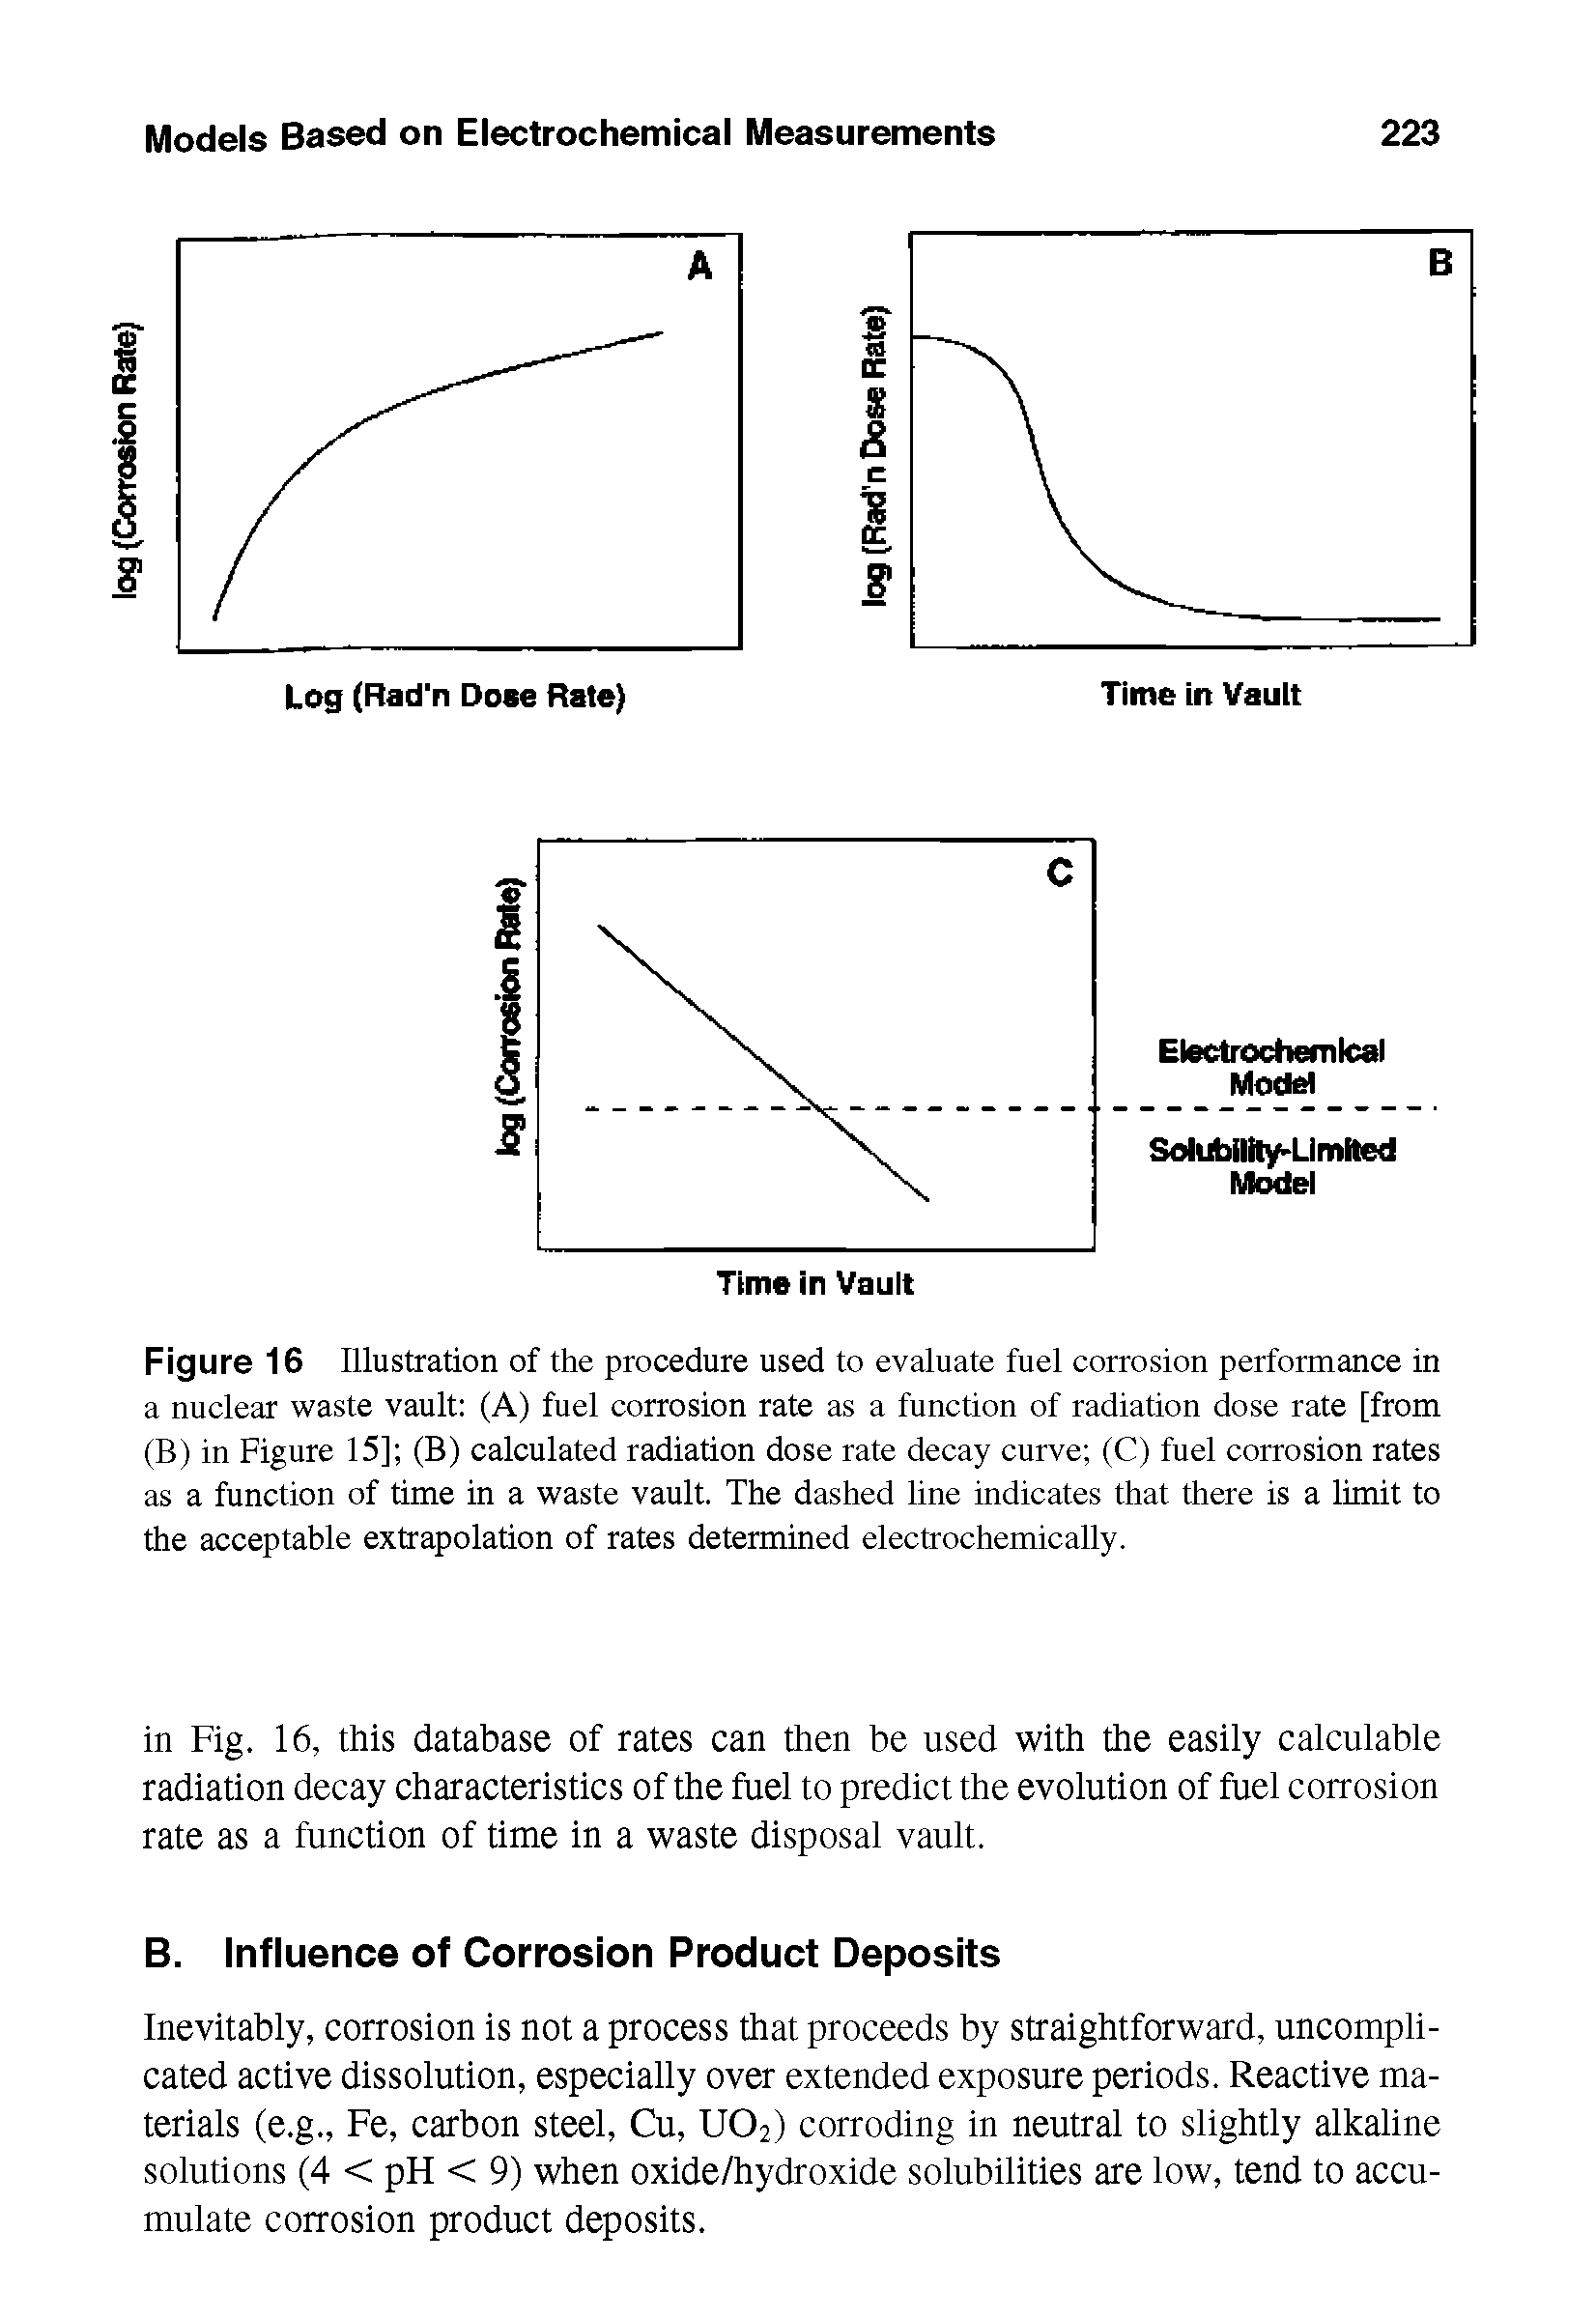 Figure 16 Illustration of the procedure used to evaluate fuel corrosion performance in a nuclear waste vault (A) fuel corrosion rate as a function of radiation dose rate [from (B) in Figure 15] (B) calculated radiation dose rate decay curve (C) fuel corrosion rates as a function of time in a waste vault. The dashed line indicates that there is a limit to the acceptable extrapolation of rates determined electrochemically.